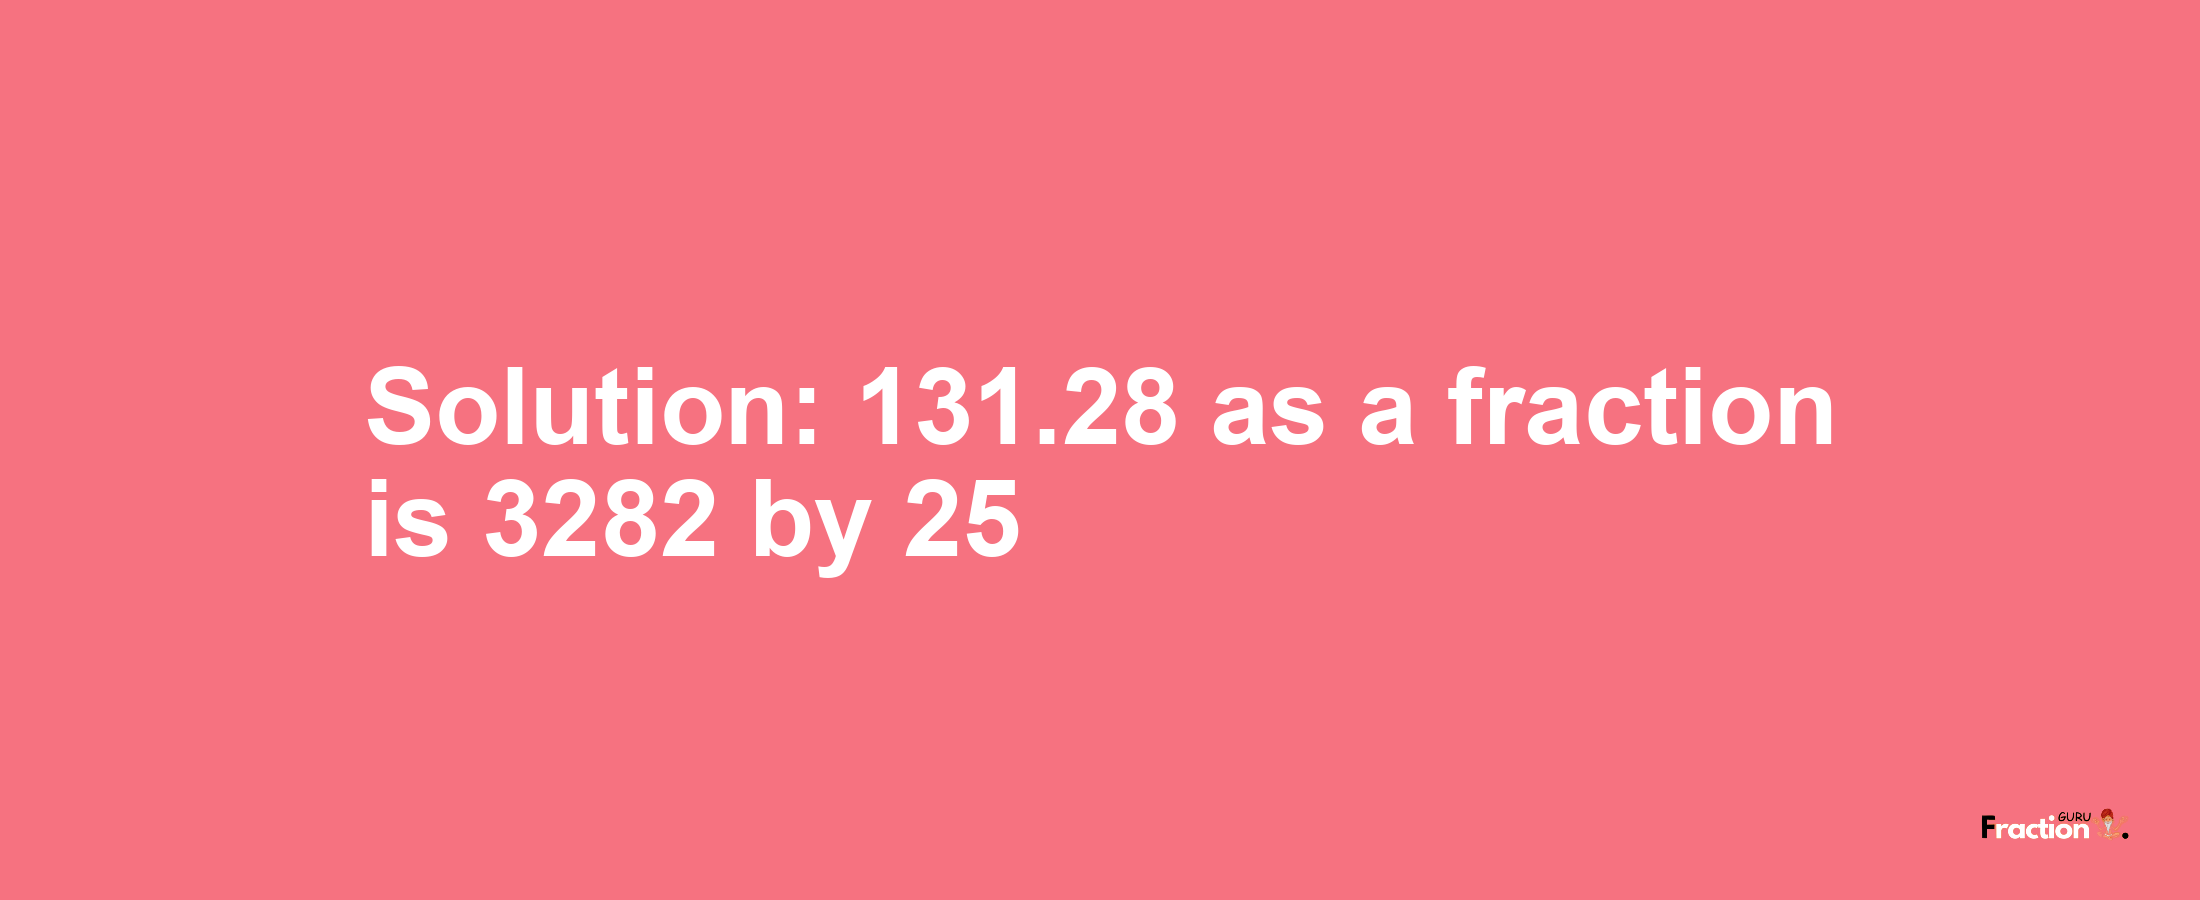 Solution:131.28 as a fraction is 3282/25